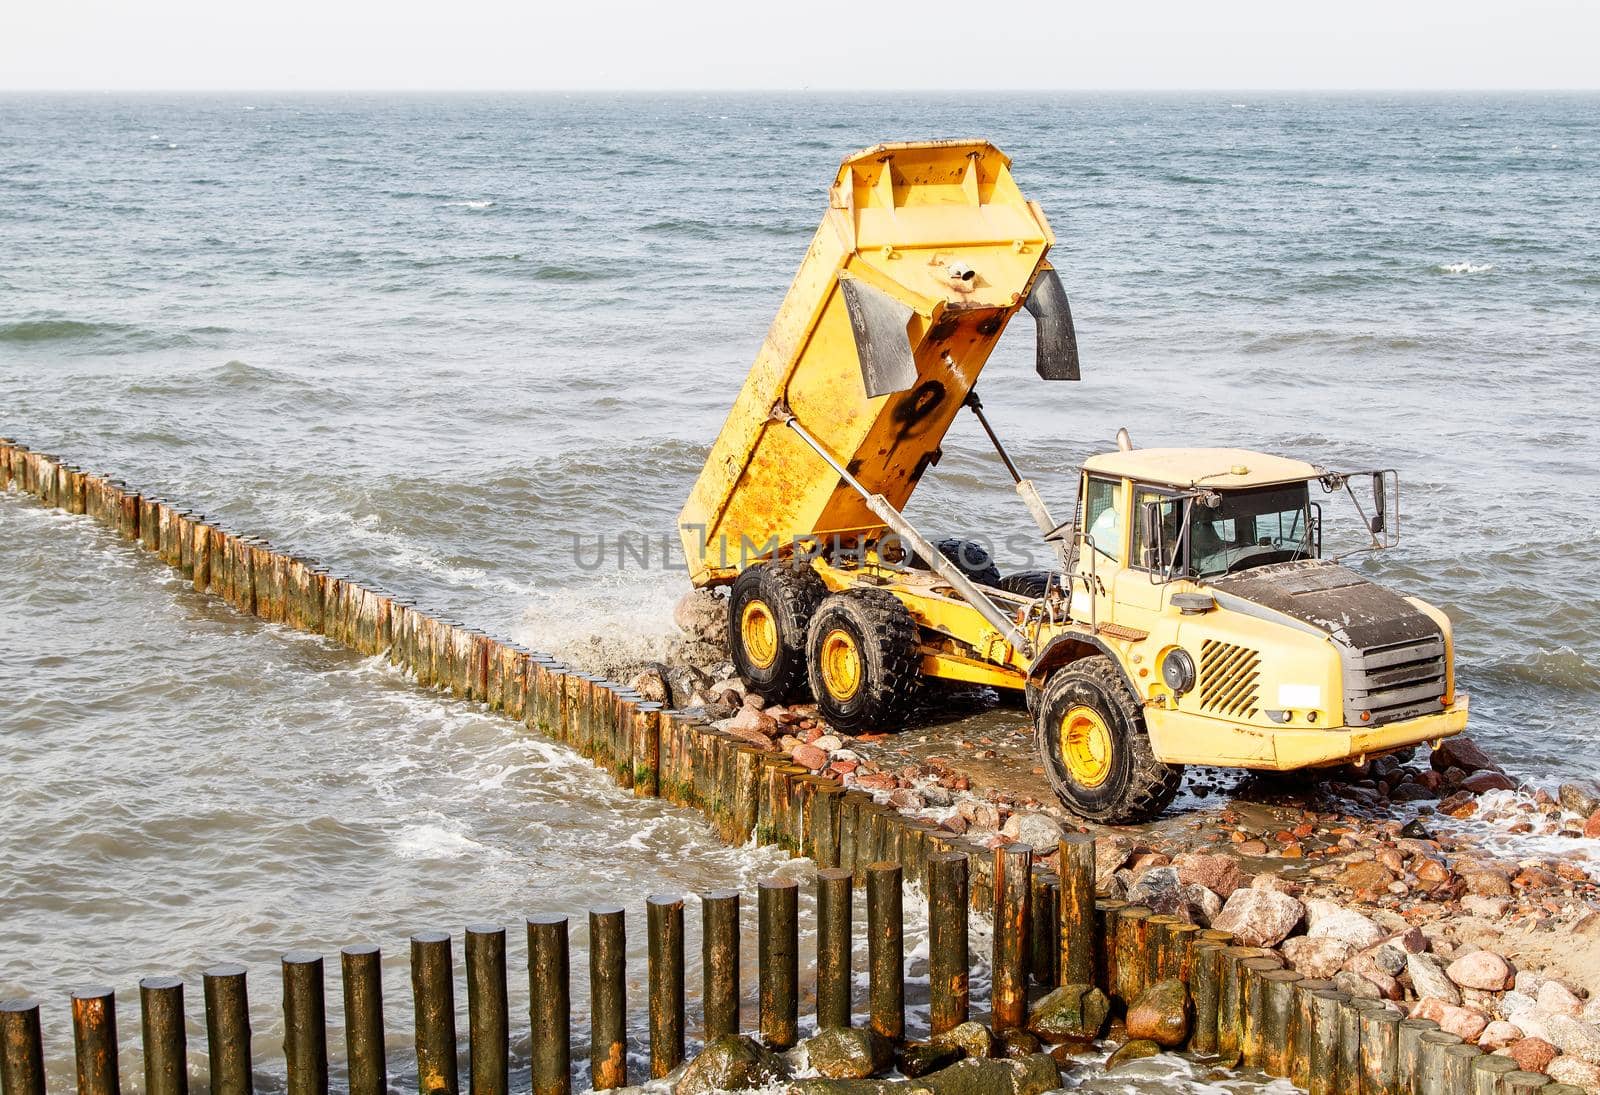 heavy truck during the construction of a breakwater by the sea on autumn day